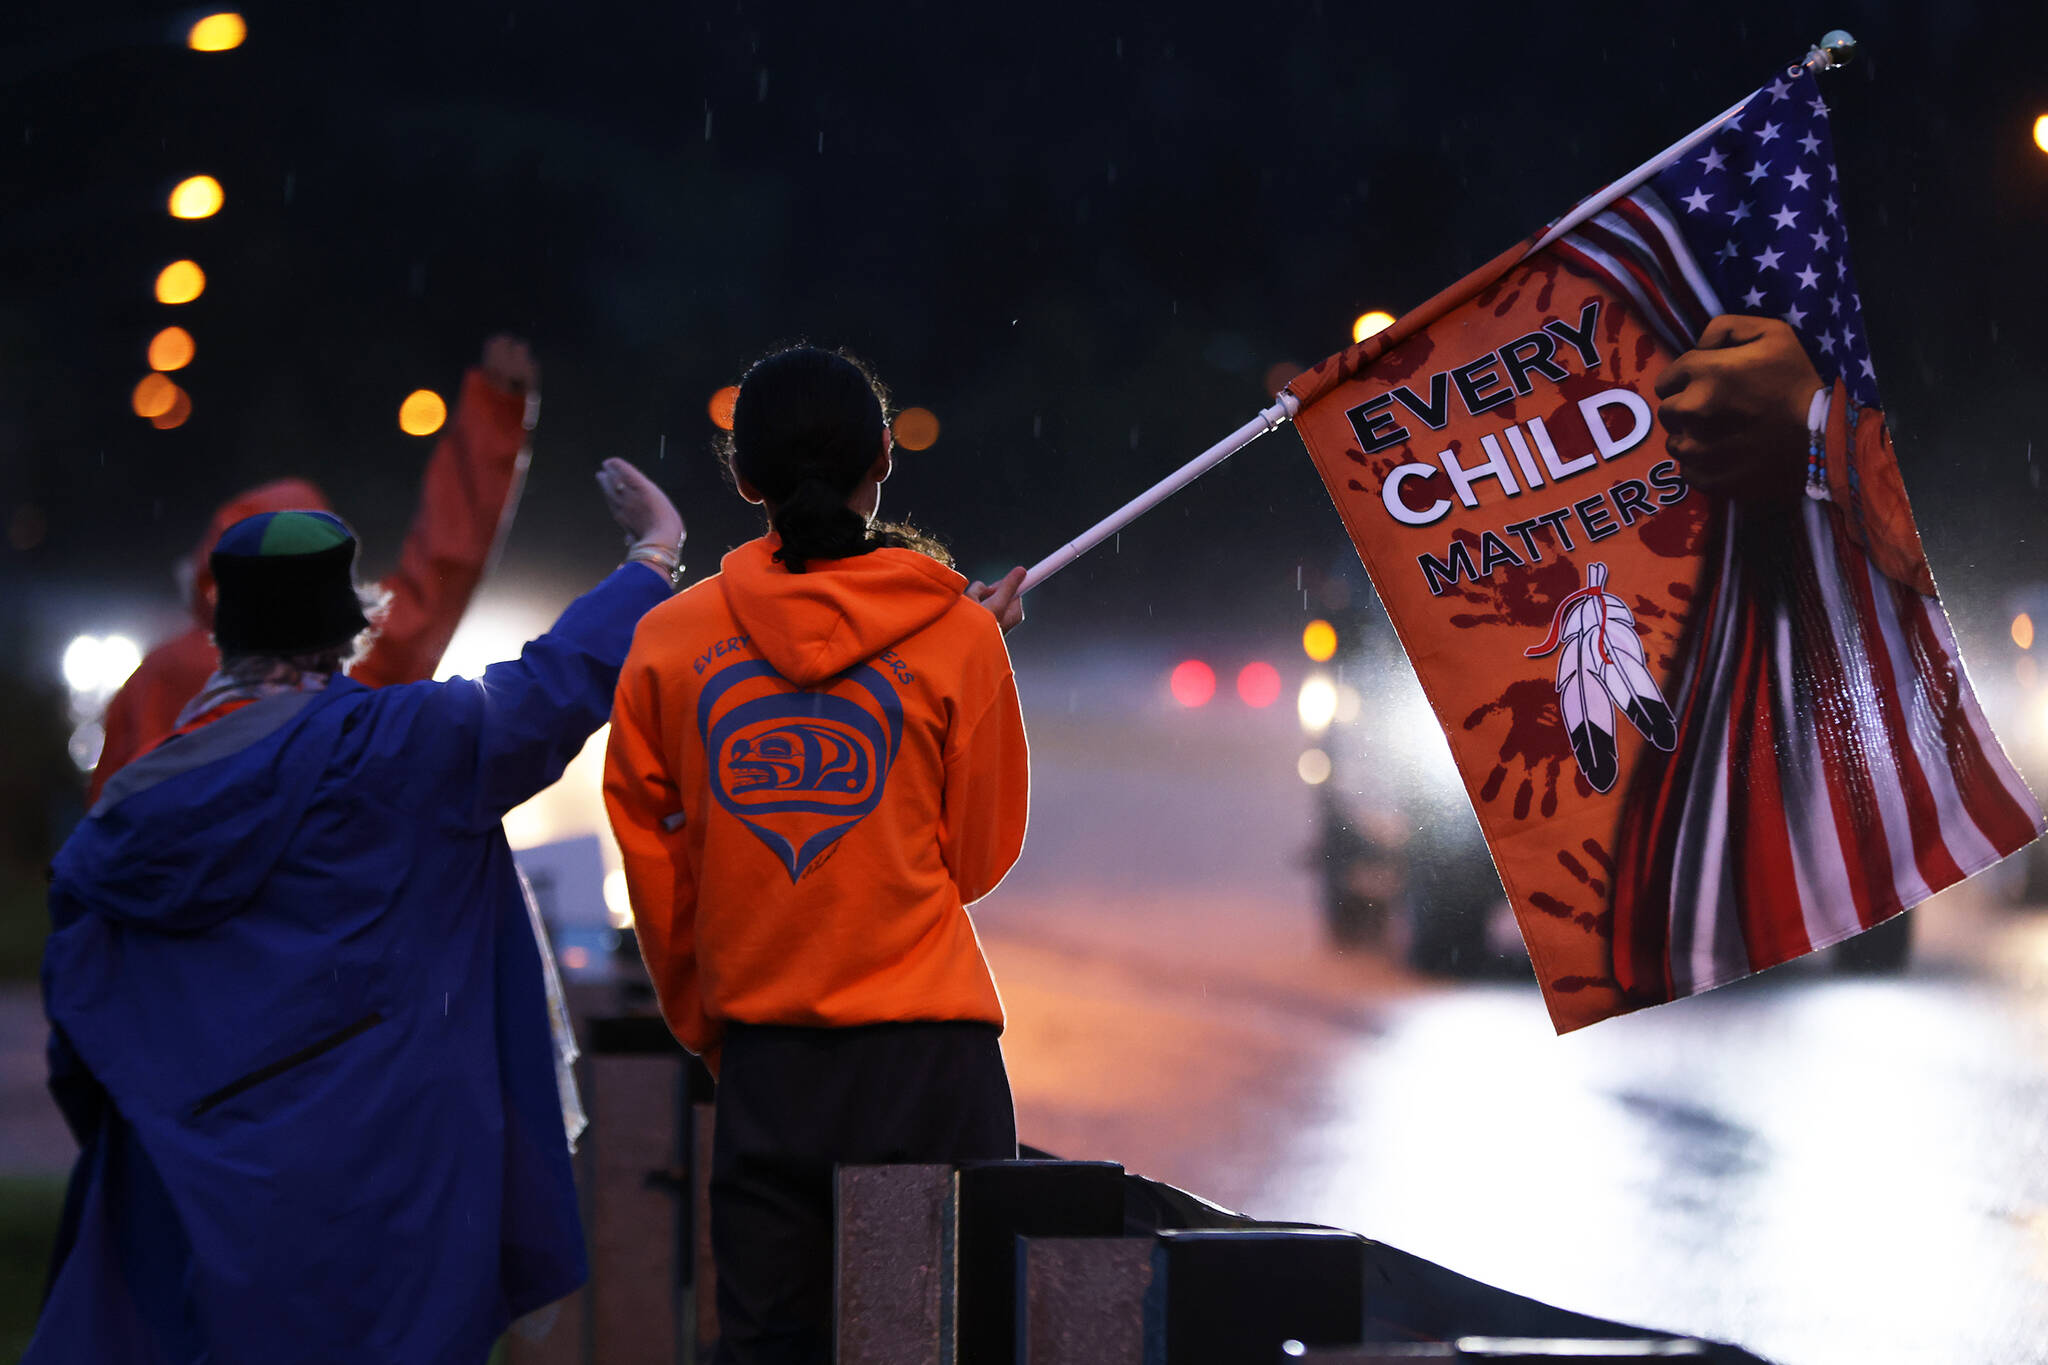 Keagan Hasselquist, 15, holds up a flag bearing the message “Every child matters” during an Orange Shirt Day event Friday morning in Juneau. The event started at 6:45 a.m. Hasselquist said he usually isn’t out and about at that time “but I’m doing good with it so far.” He said it was awesome to see strong turnout for the event. (Ben Hohenstatt / Juneau Empire)